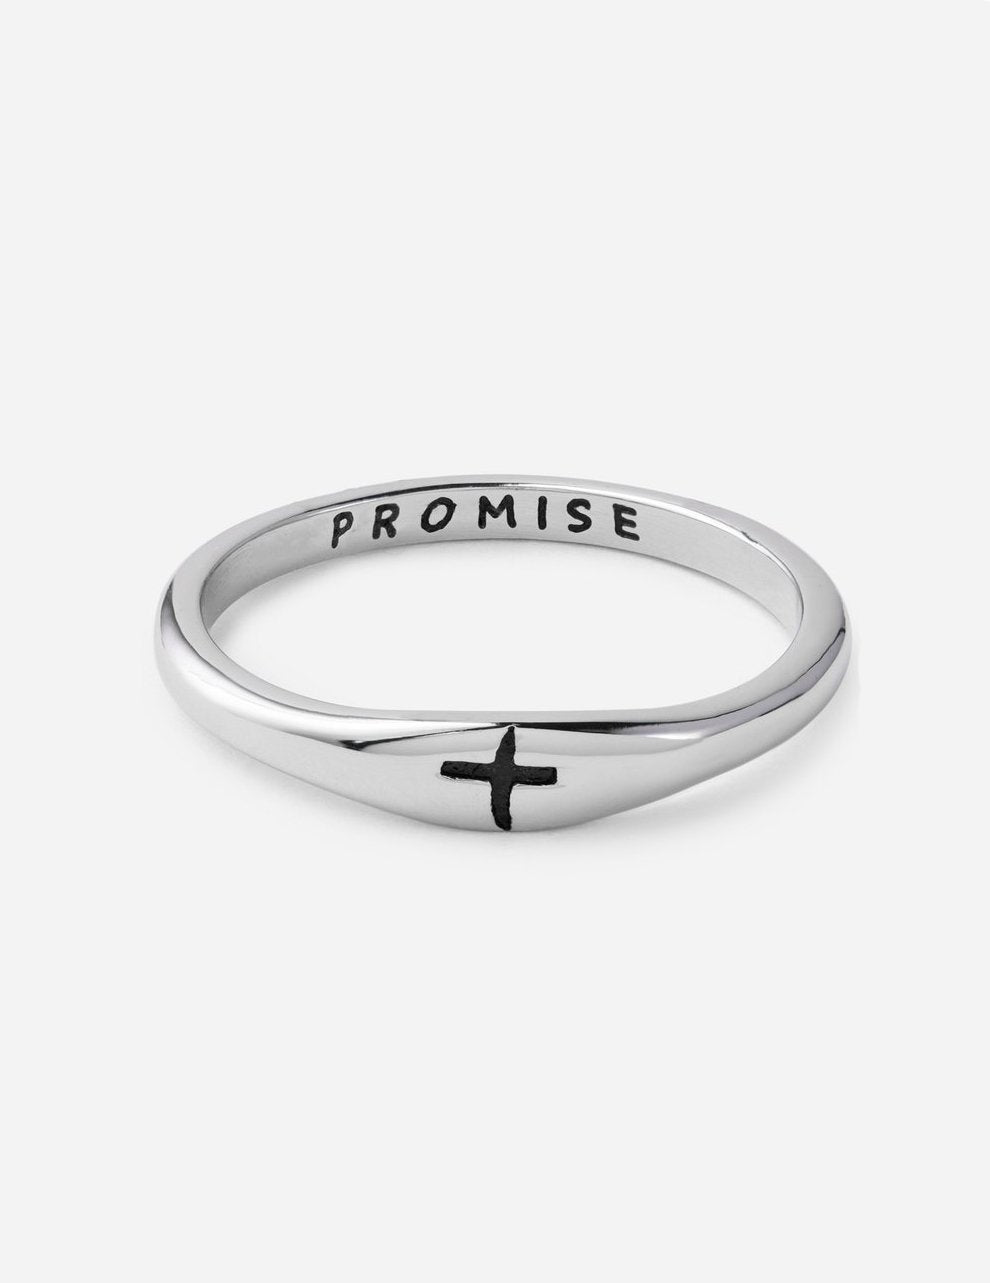 Promise Rings | Purity Rings | Christian Rings | Elevated Faith2